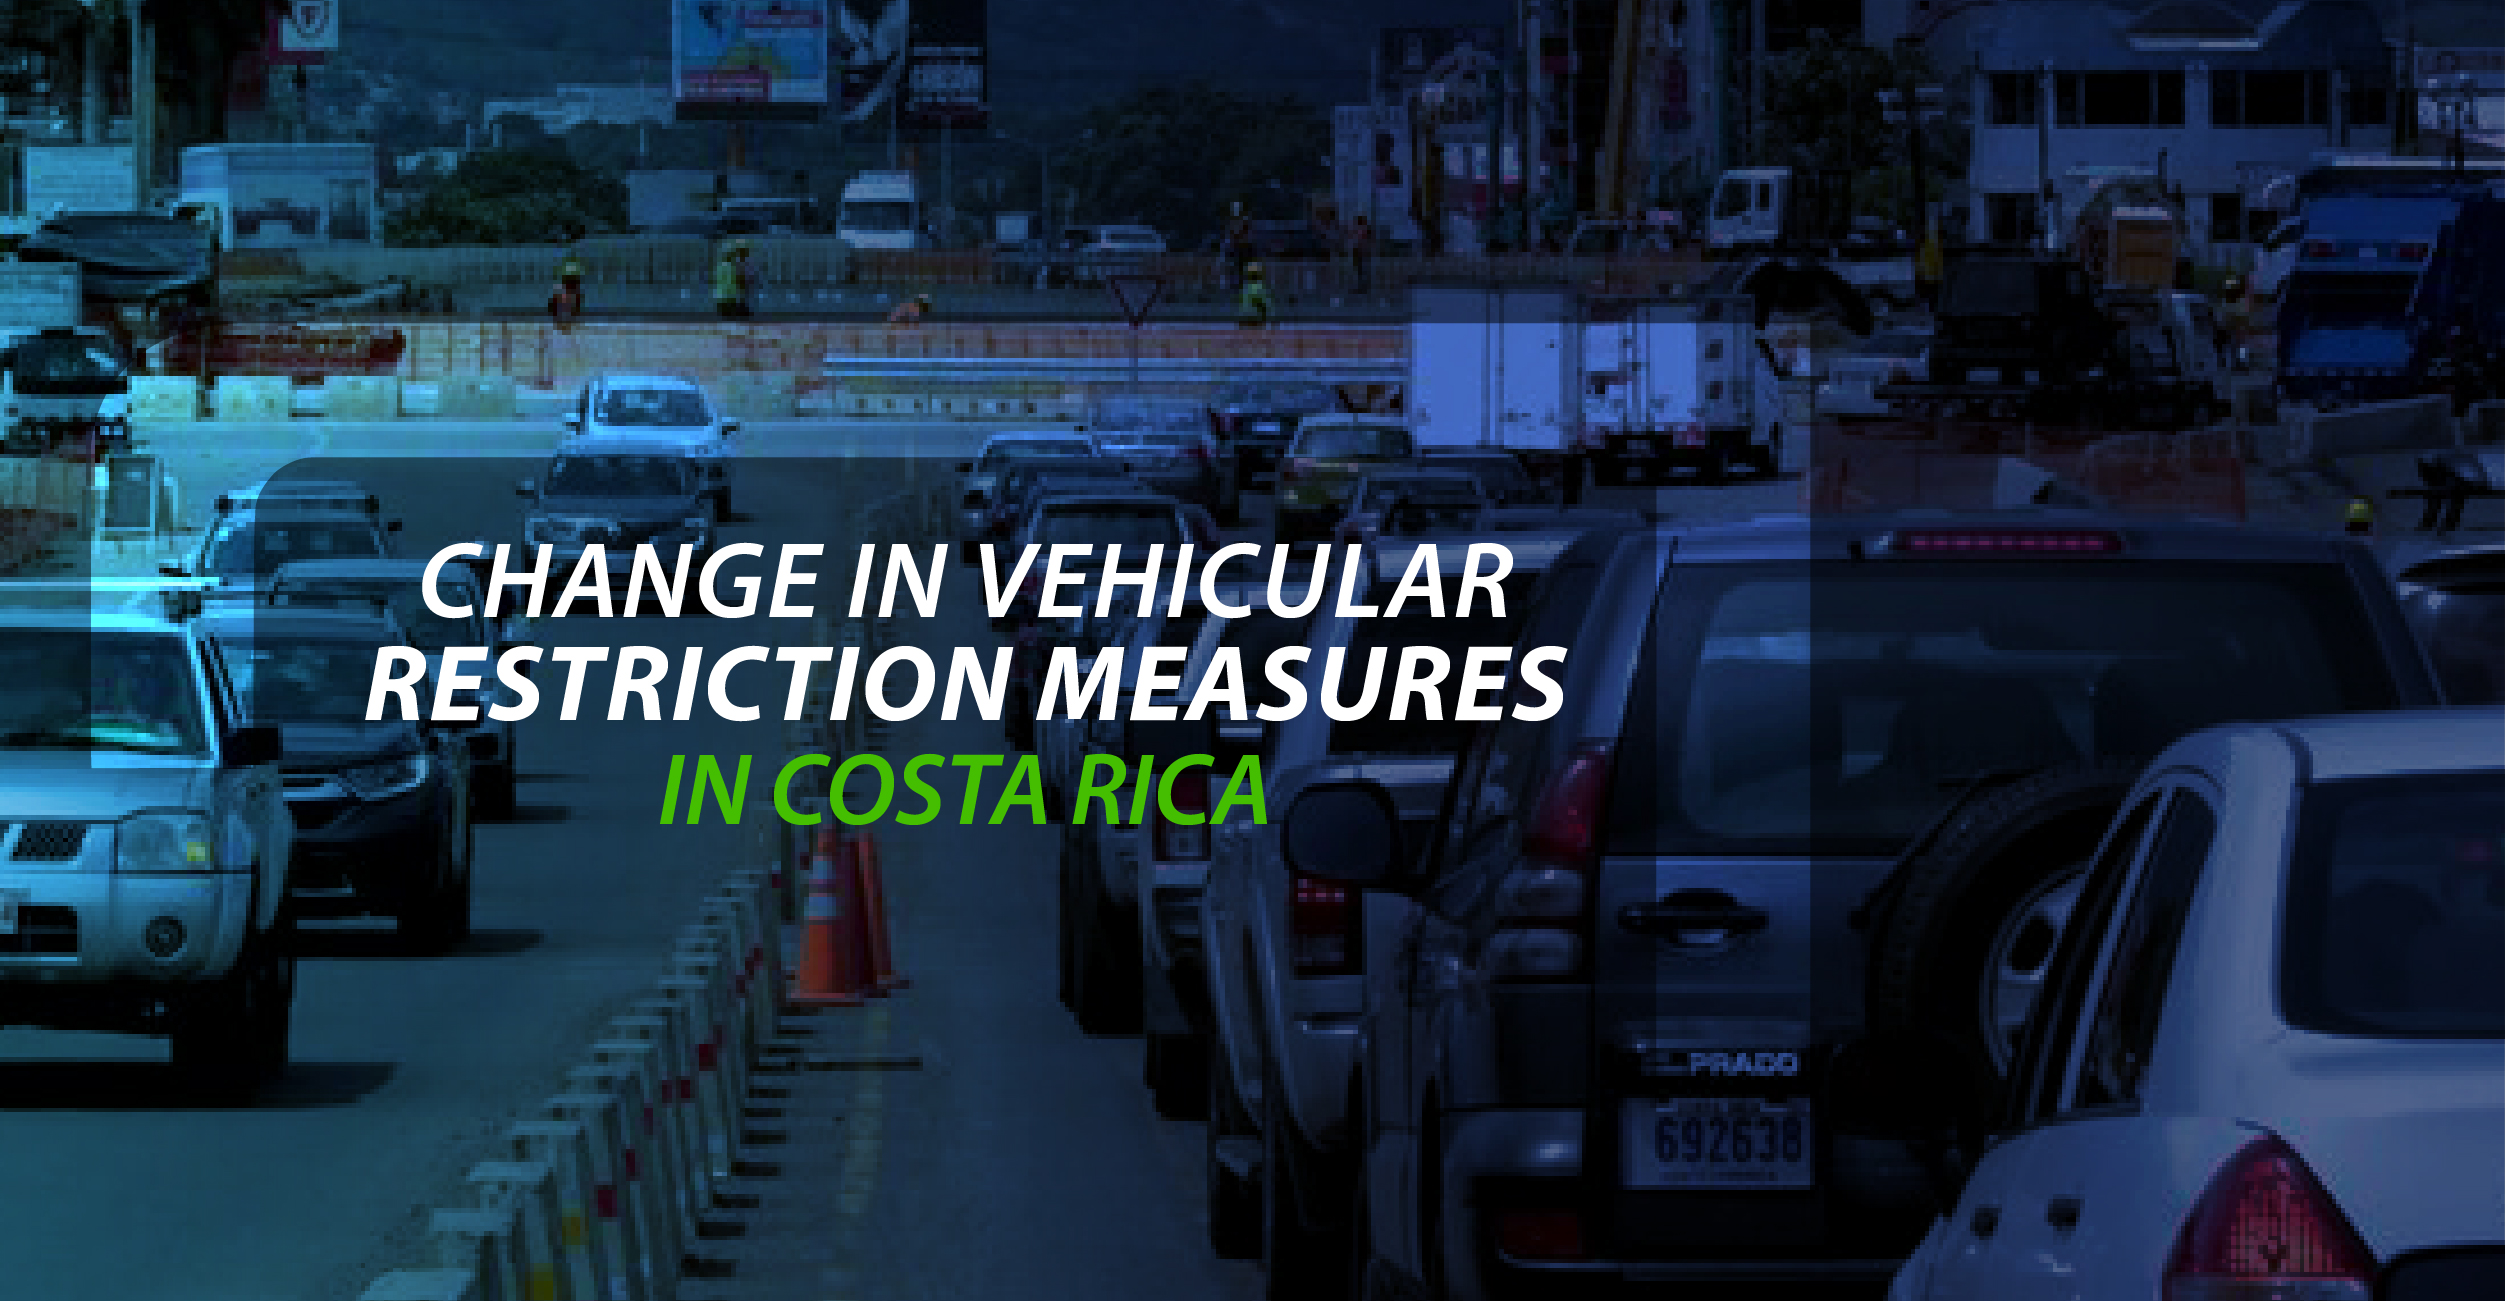 Changes in vehicular restriction measures in Costa Rica.